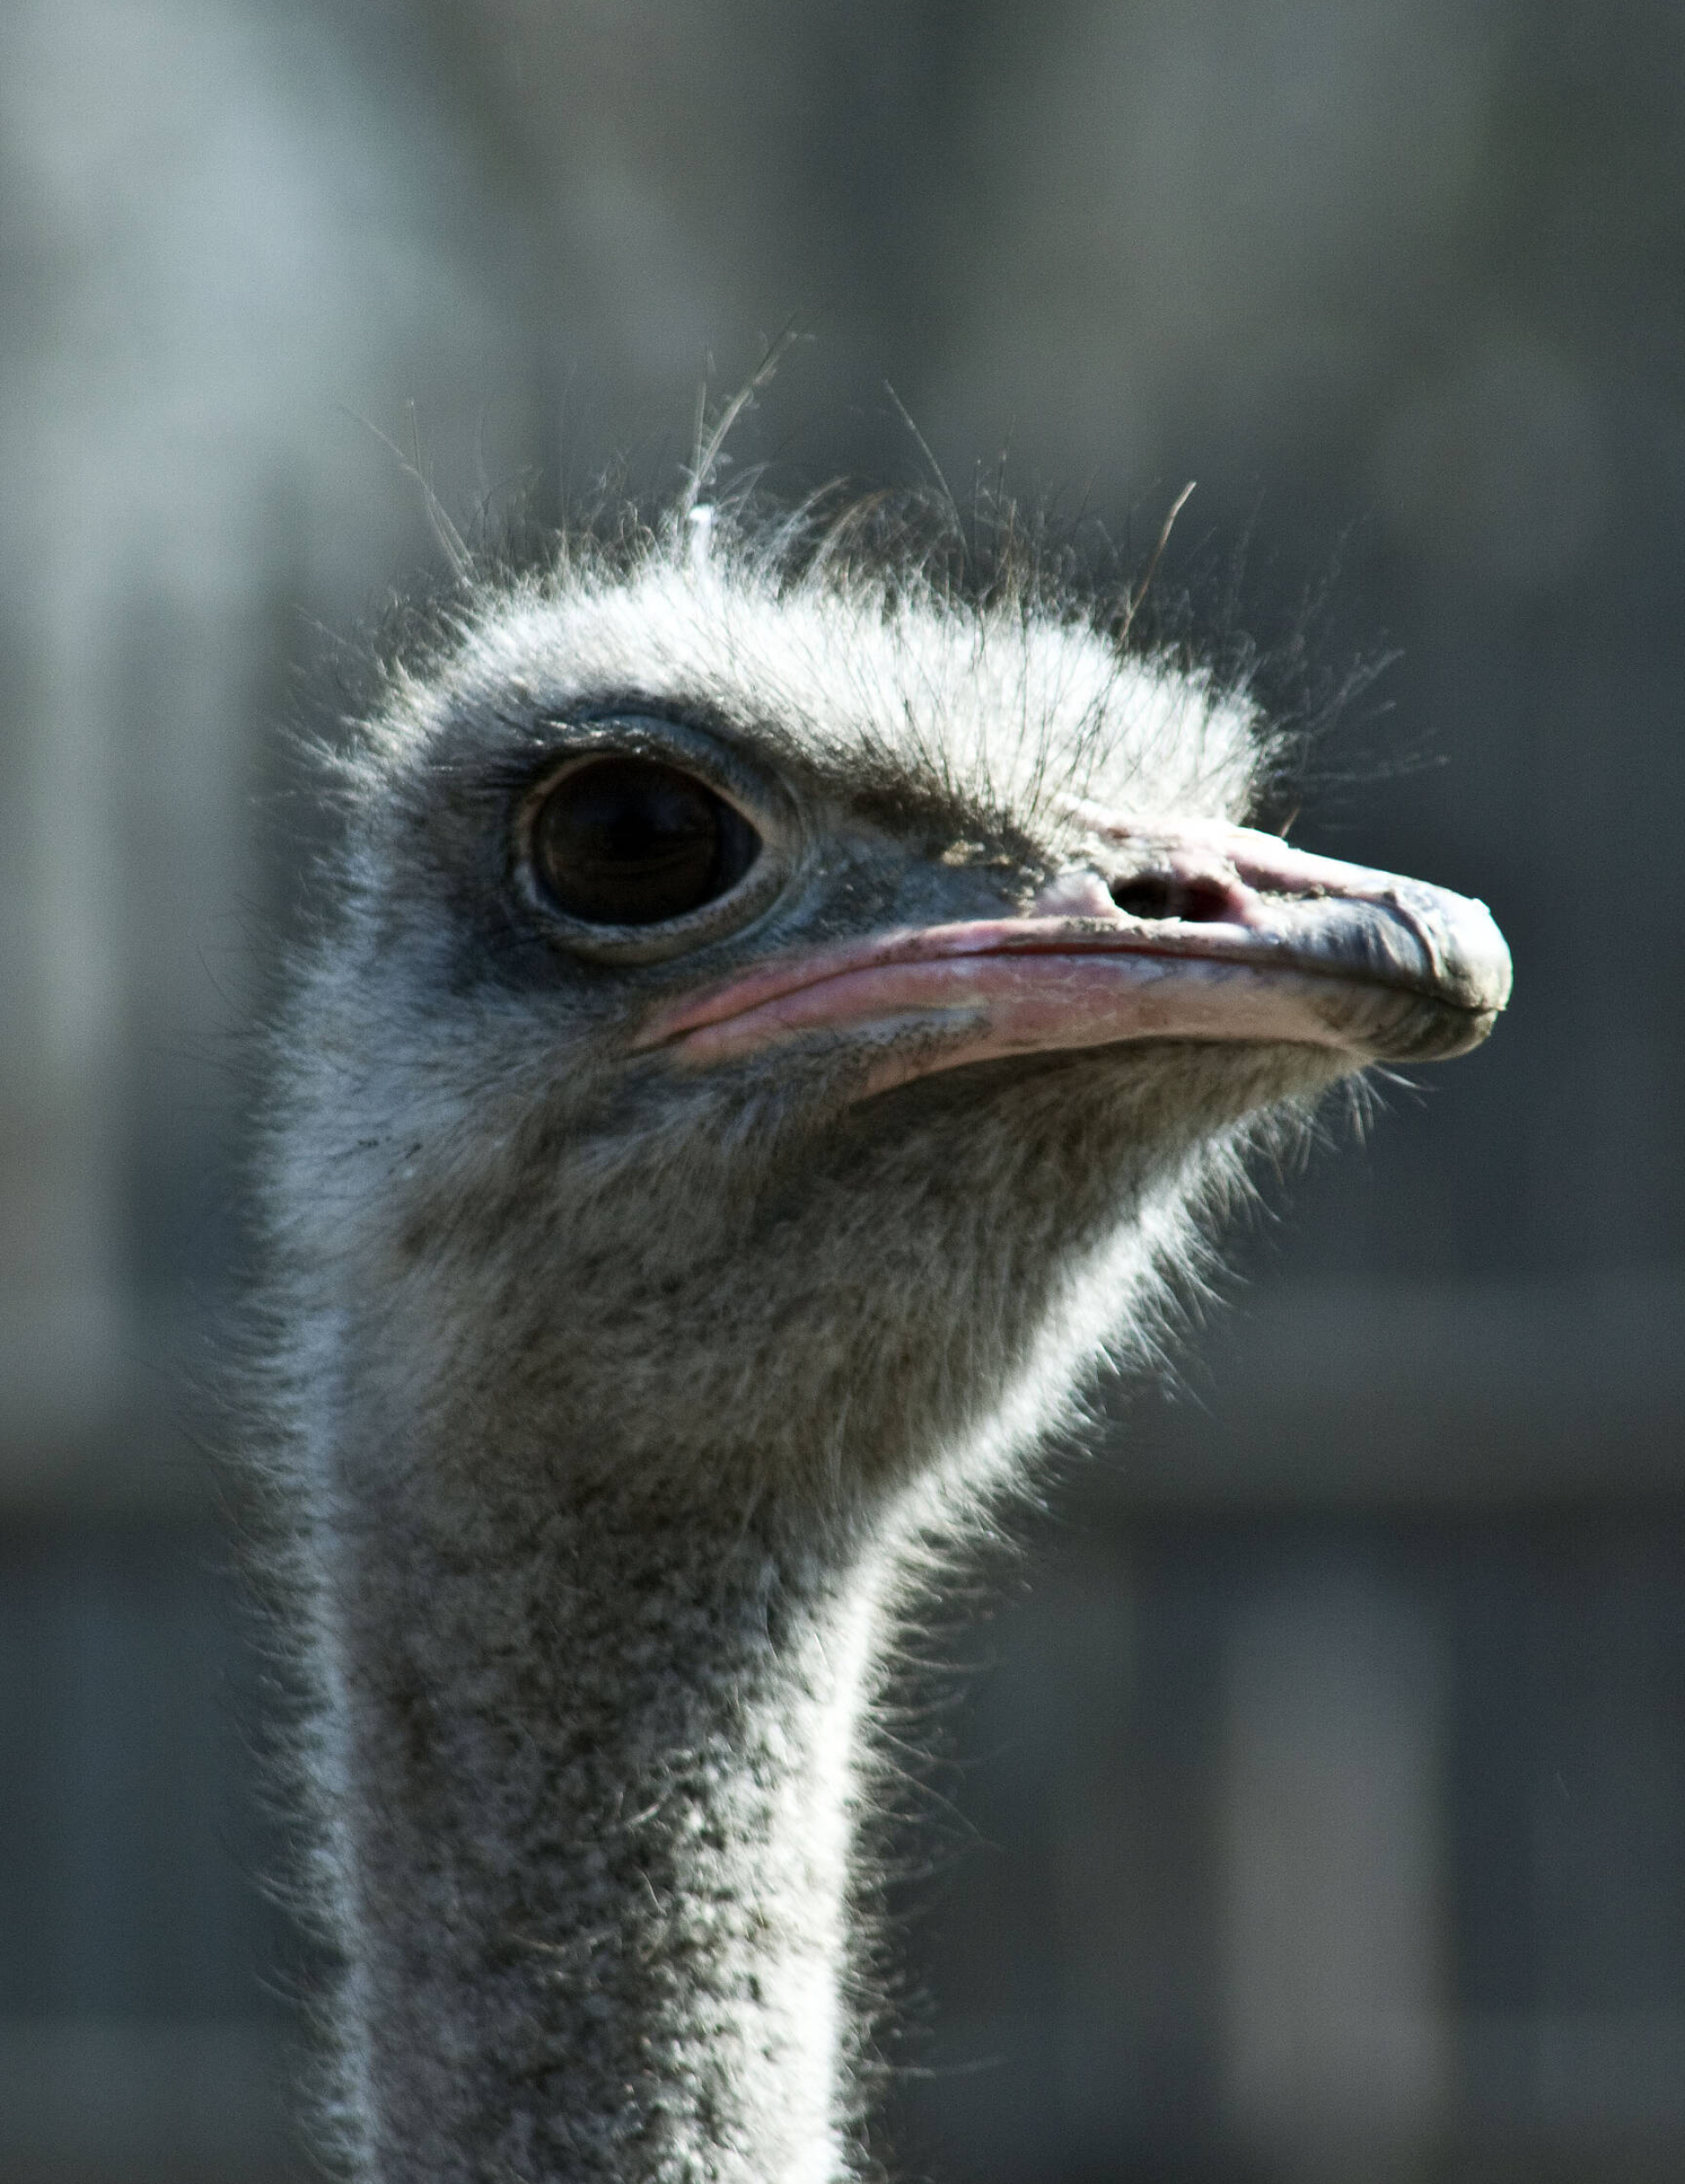 HD wallpaper, Free Pictures, Creative Commons License, Kyiv Zoo, 1920X2490 Hd Phone, Phone Hd Ostrich Background Photo, Ostrich Image Gallery